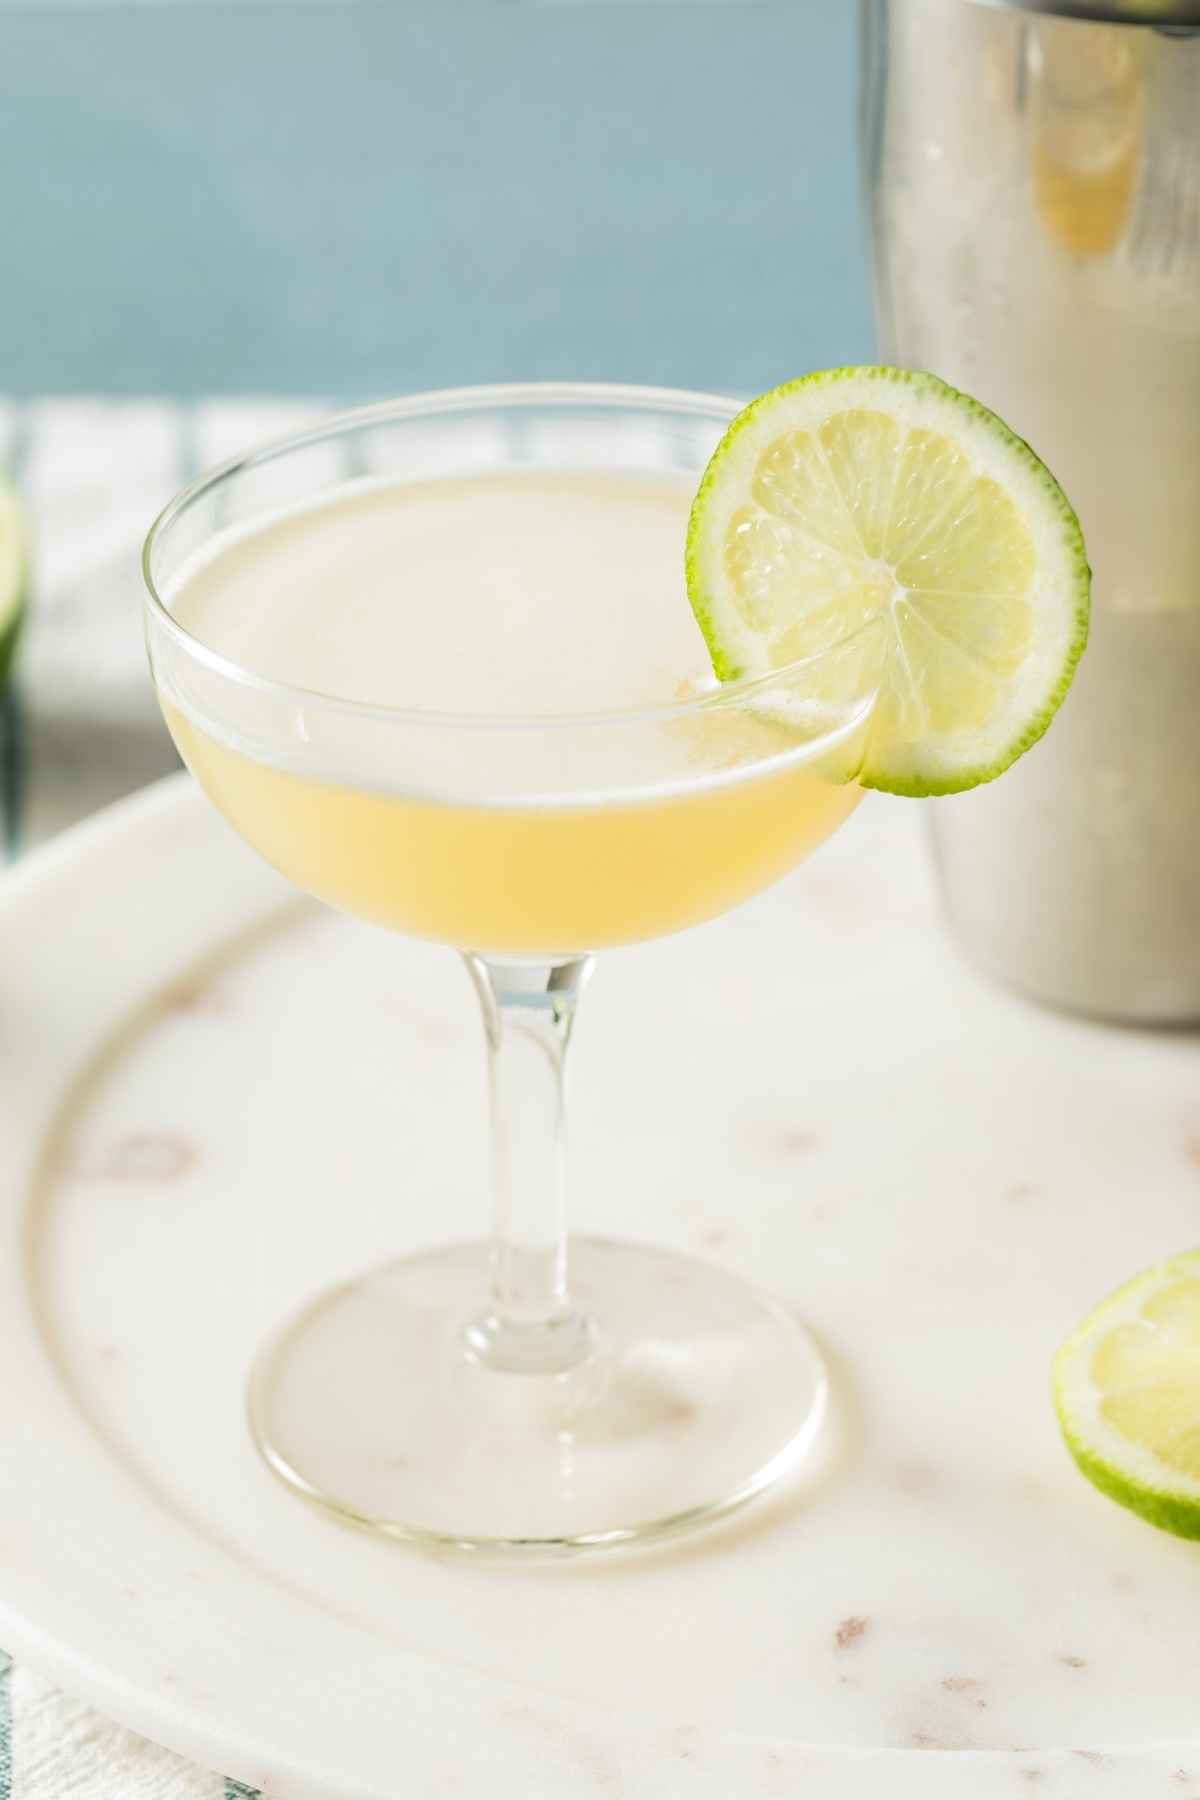 The Gimlet Goes To Grenoble! — Try Tribe’s French Gimlet Cocktail